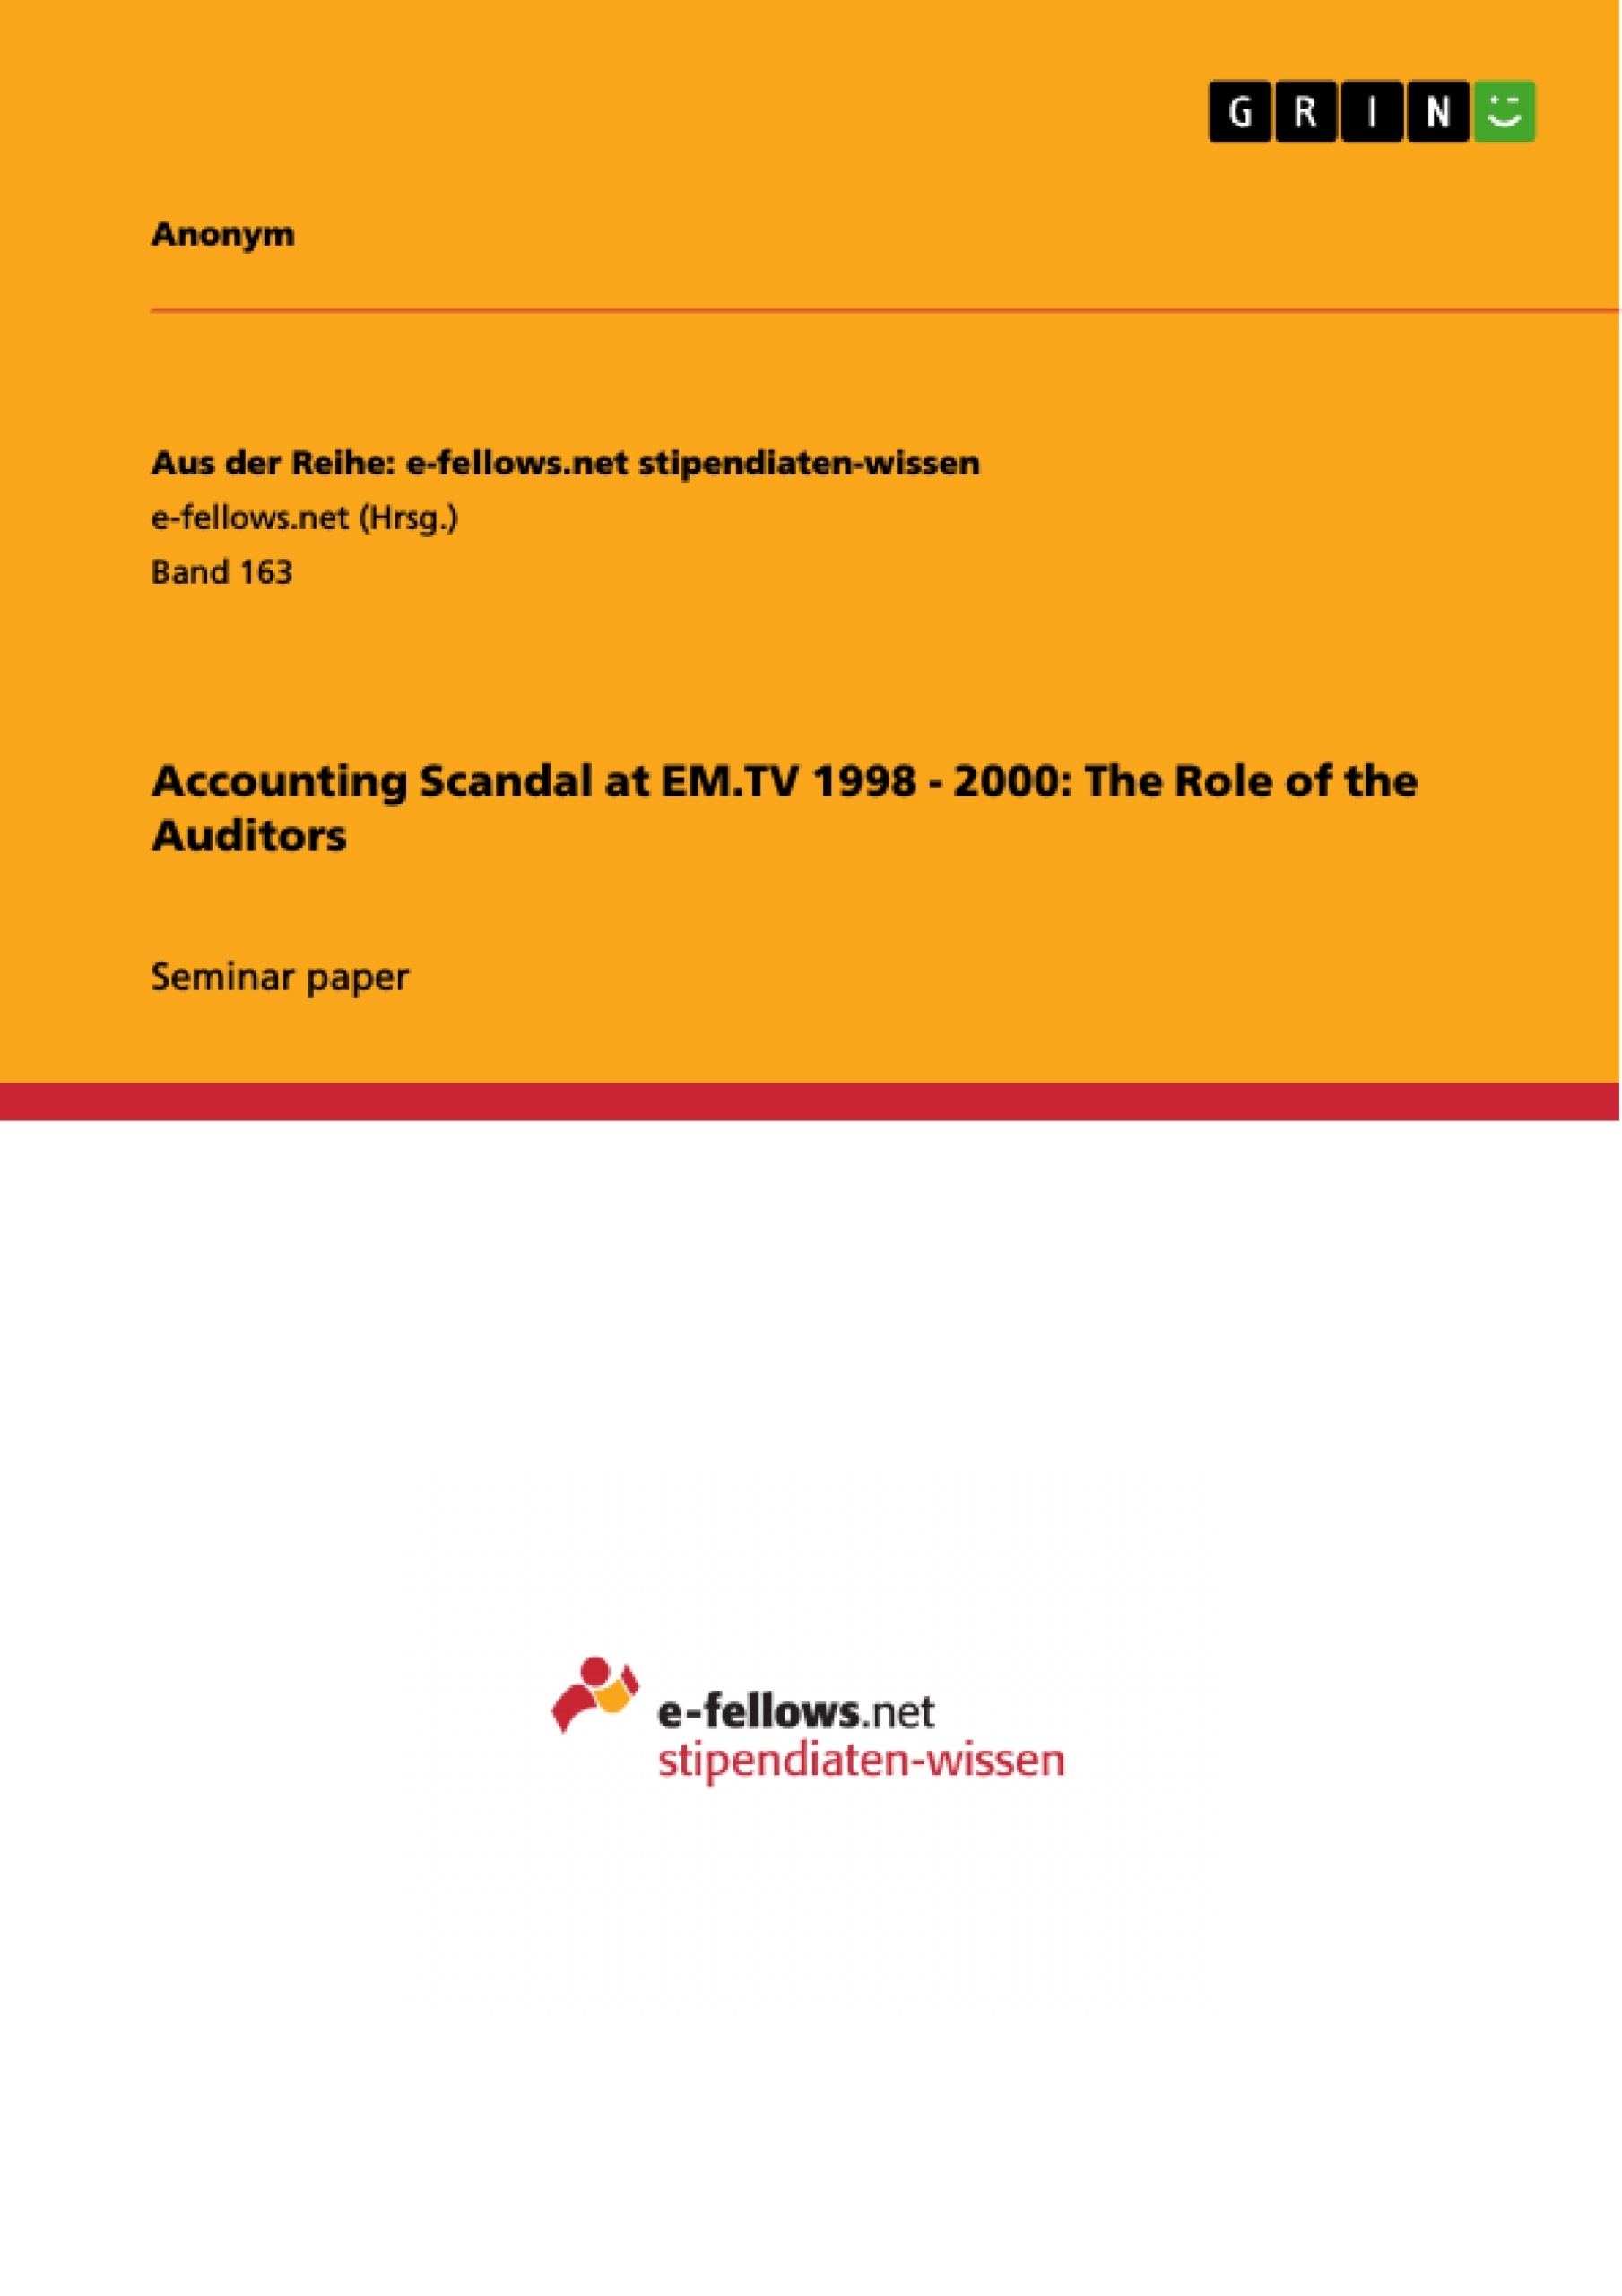 Titre: Accounting Scandal at EM.TV 1998 - 2000: The Role of the Auditors